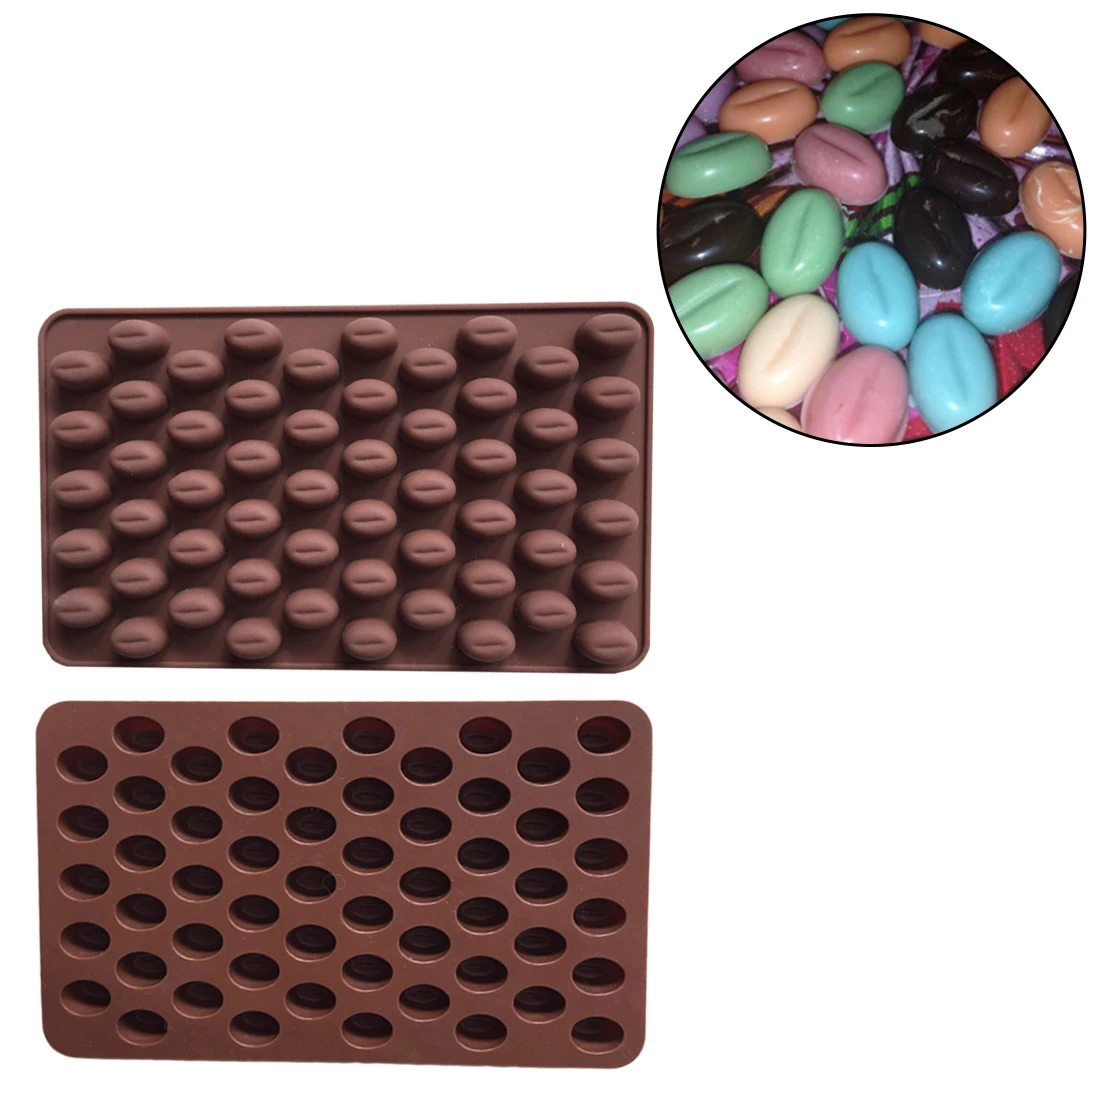 

Food Grade High Quality 55 Cavities Silicone Mini Coffee Beans Chocolate Molds, Brown